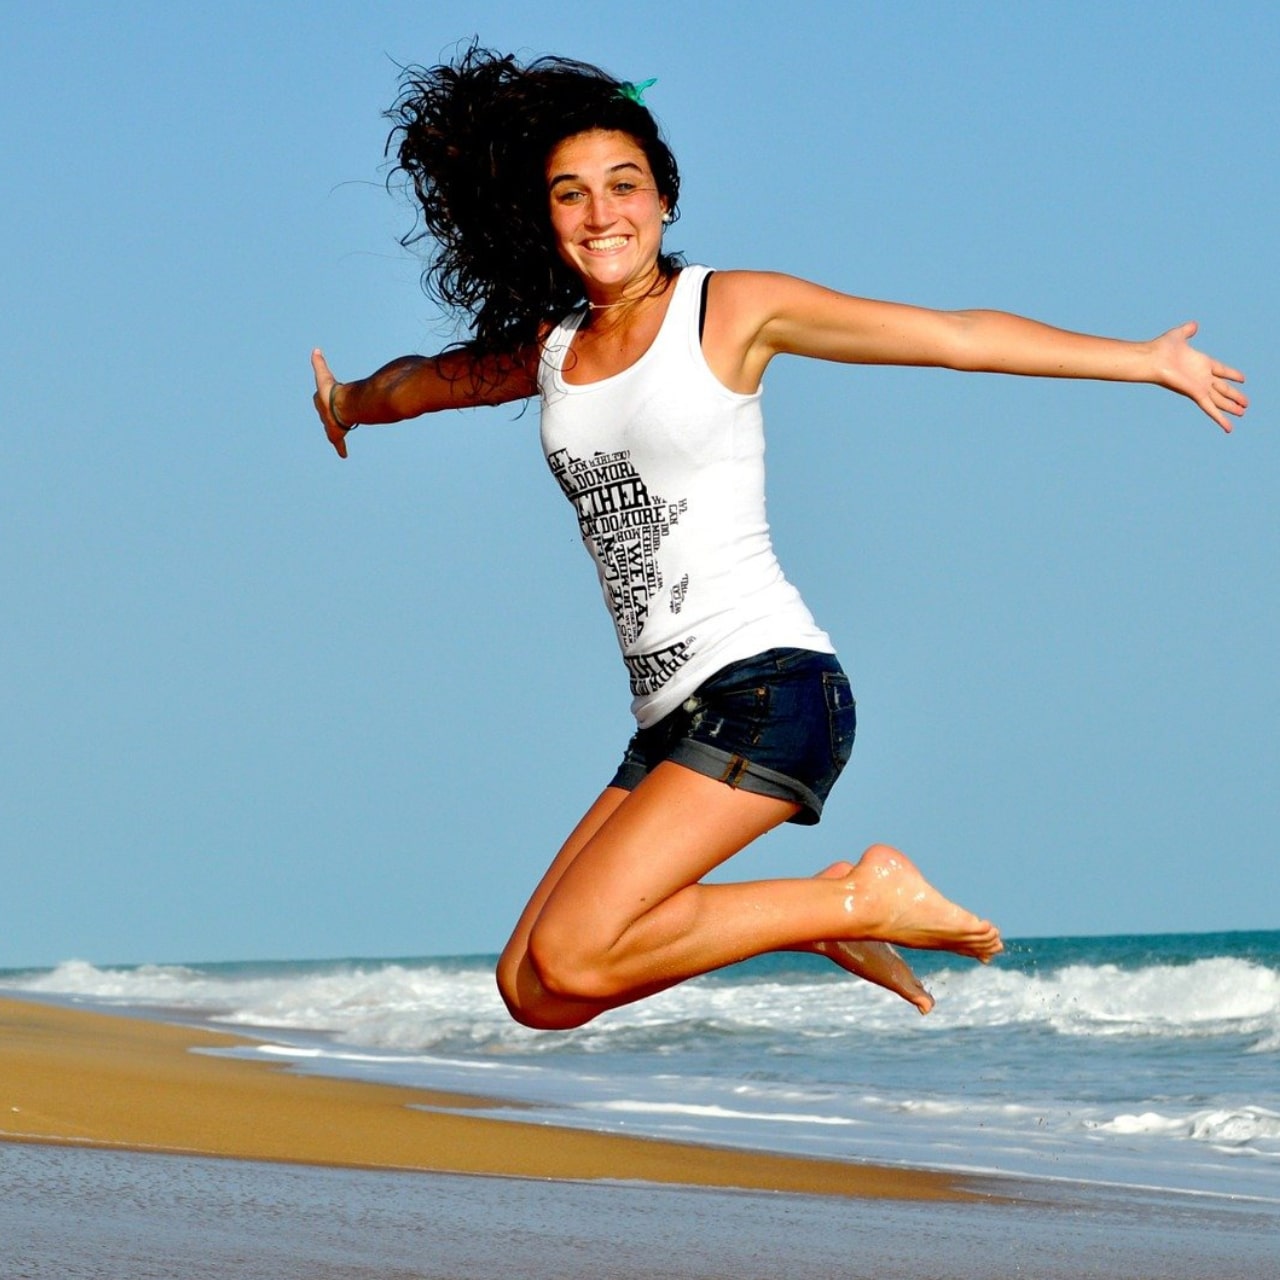 Photo of a woman jumping.